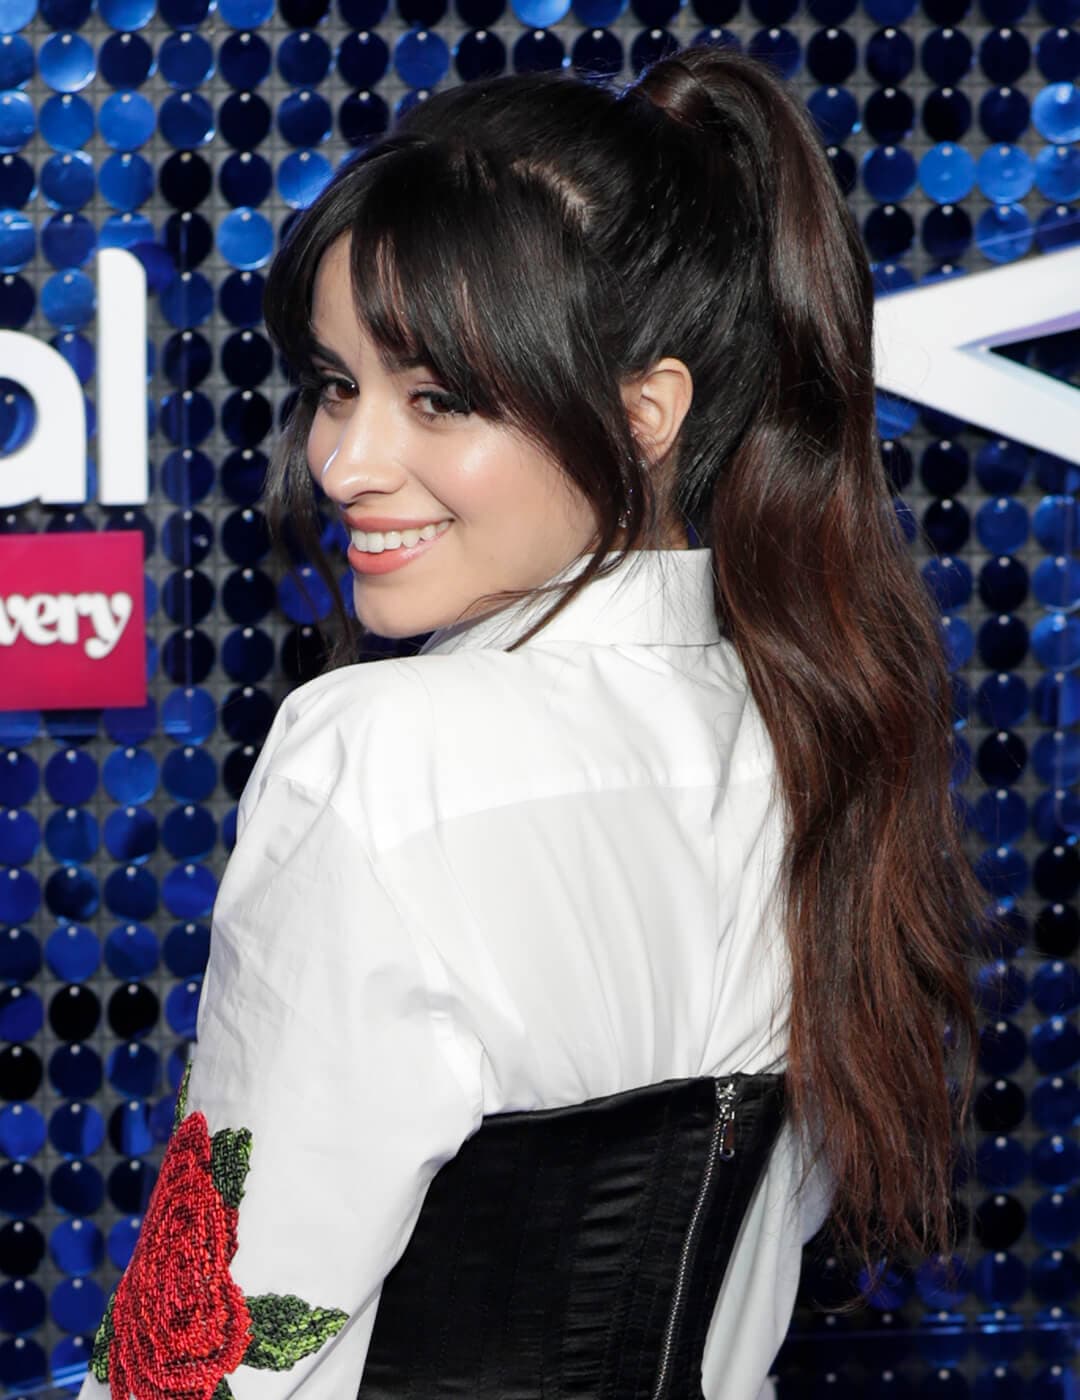 Camila Cabello rocking a white shirt with a rose print, black corsette, and high ponytail with bangs hairstyle